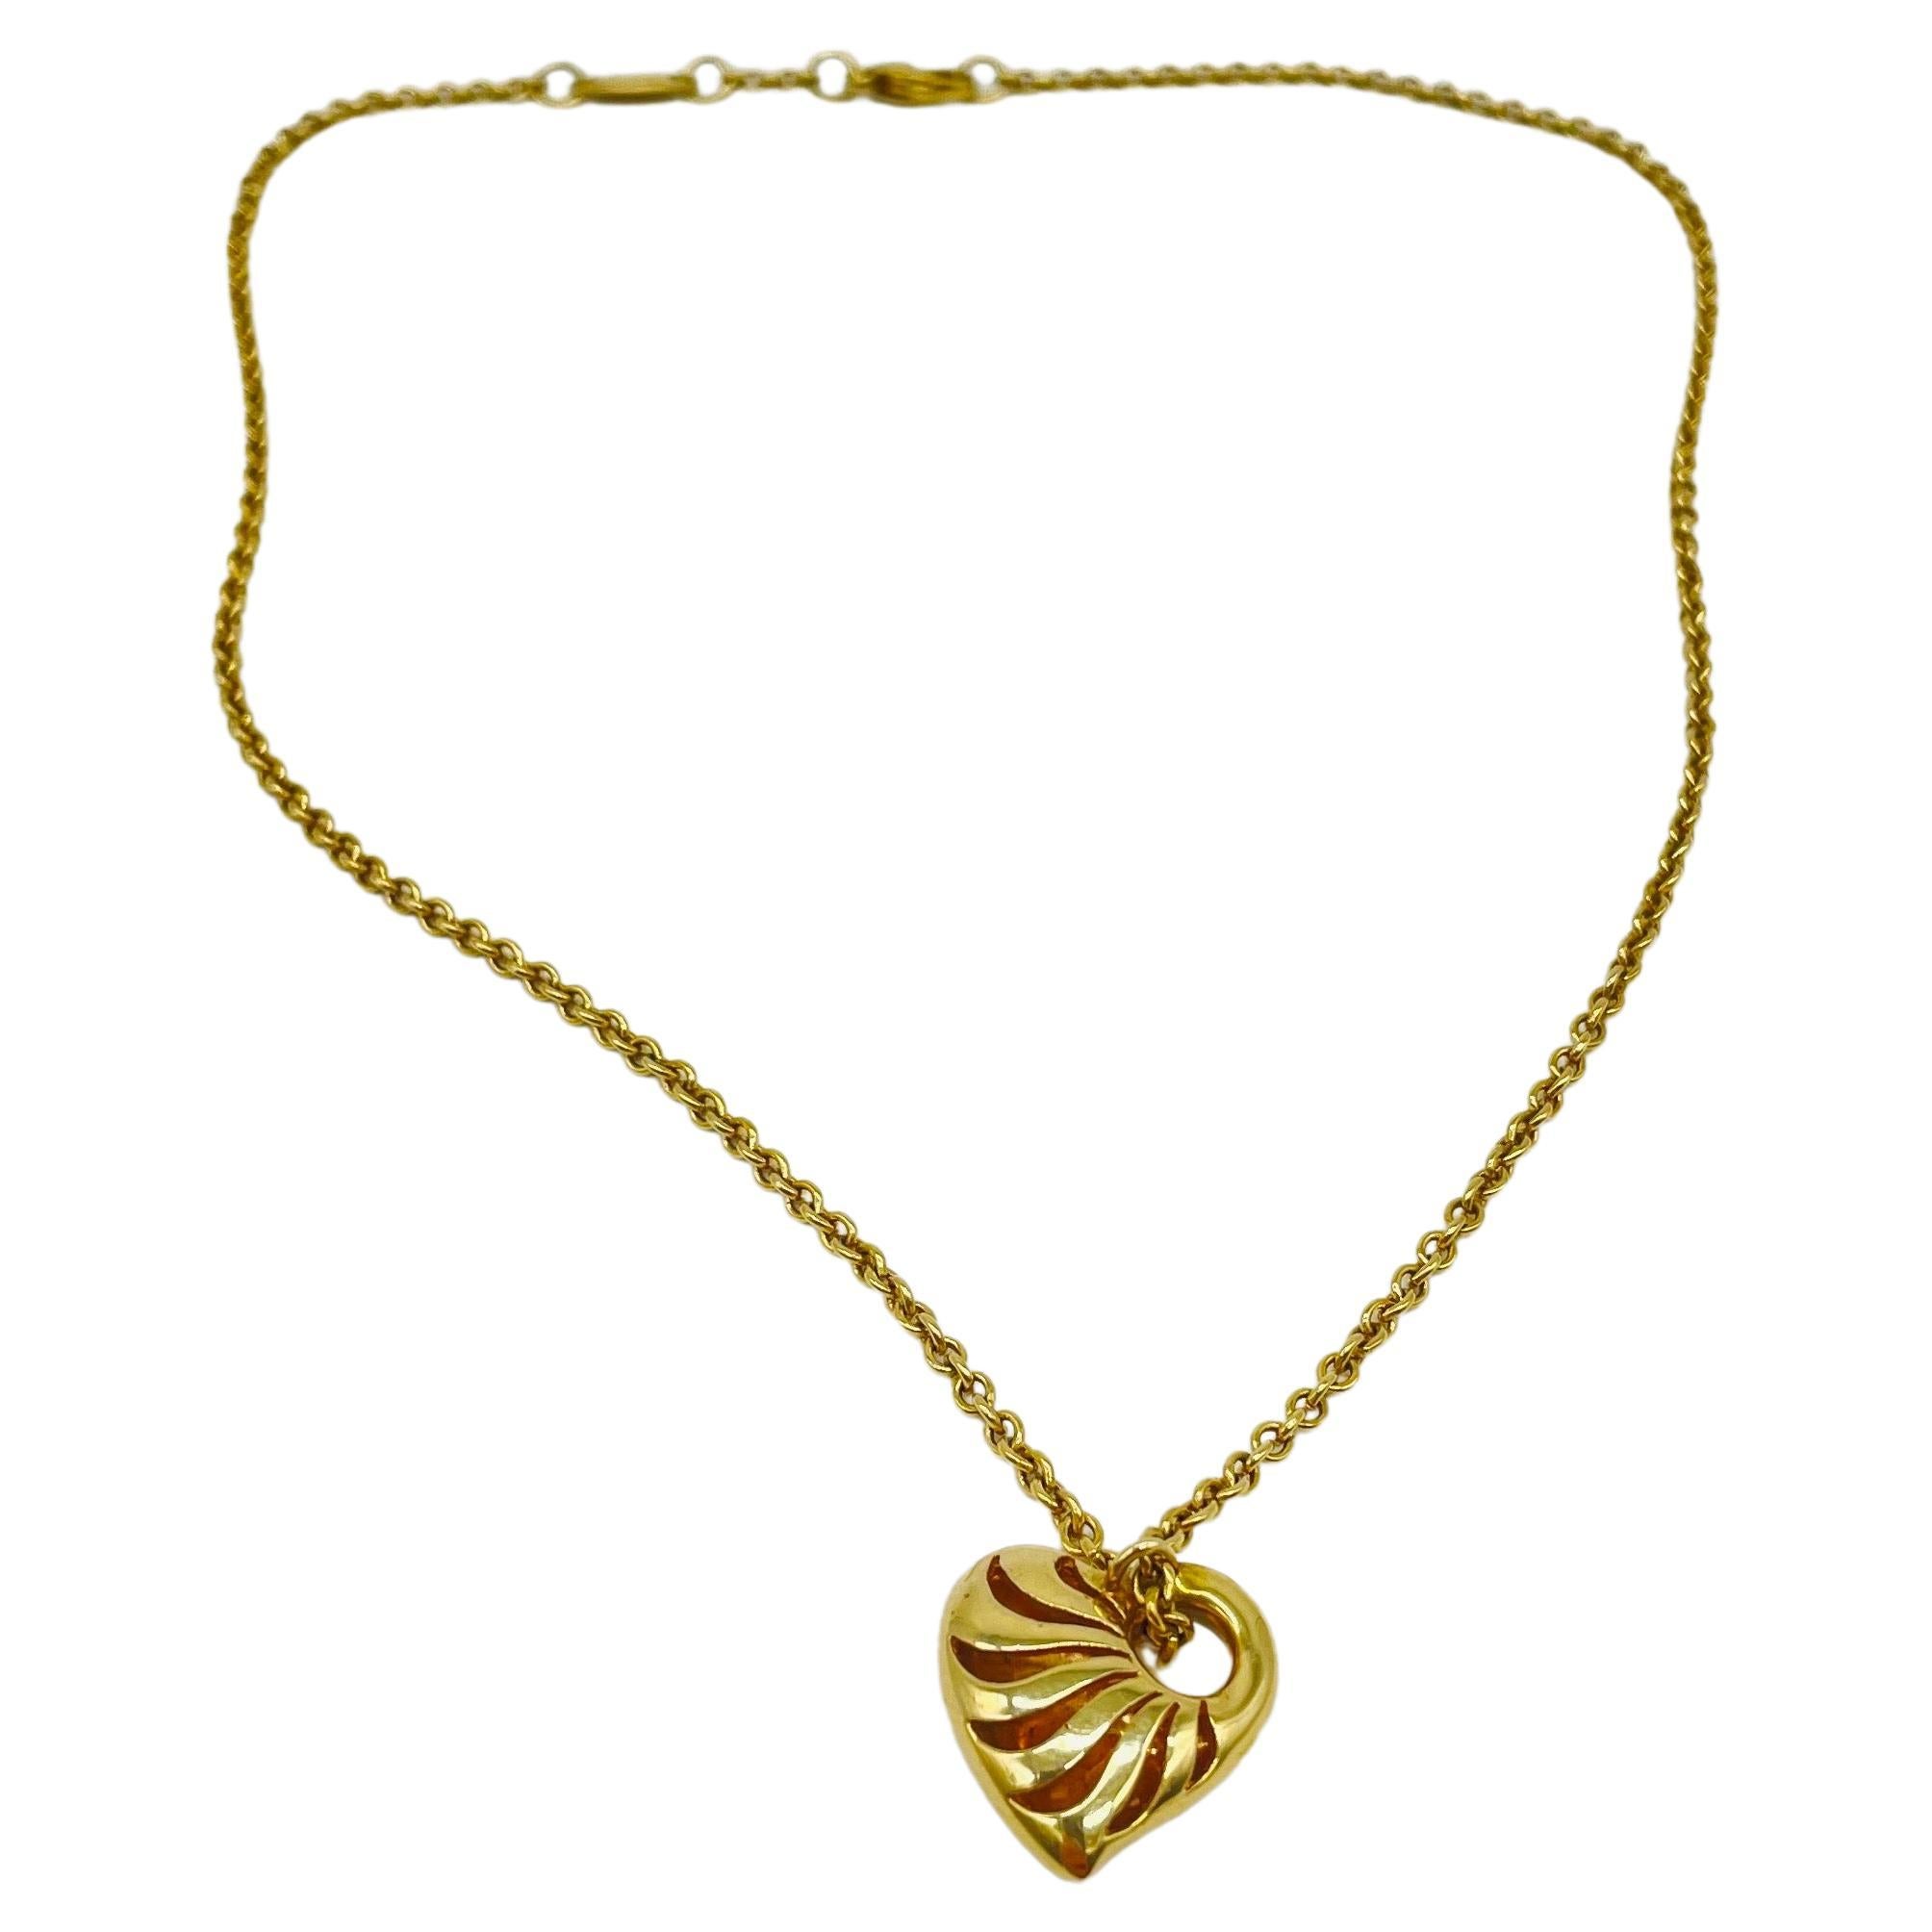 Women's beautiful heart-shaped necklace in 14k yellow gold For Sale